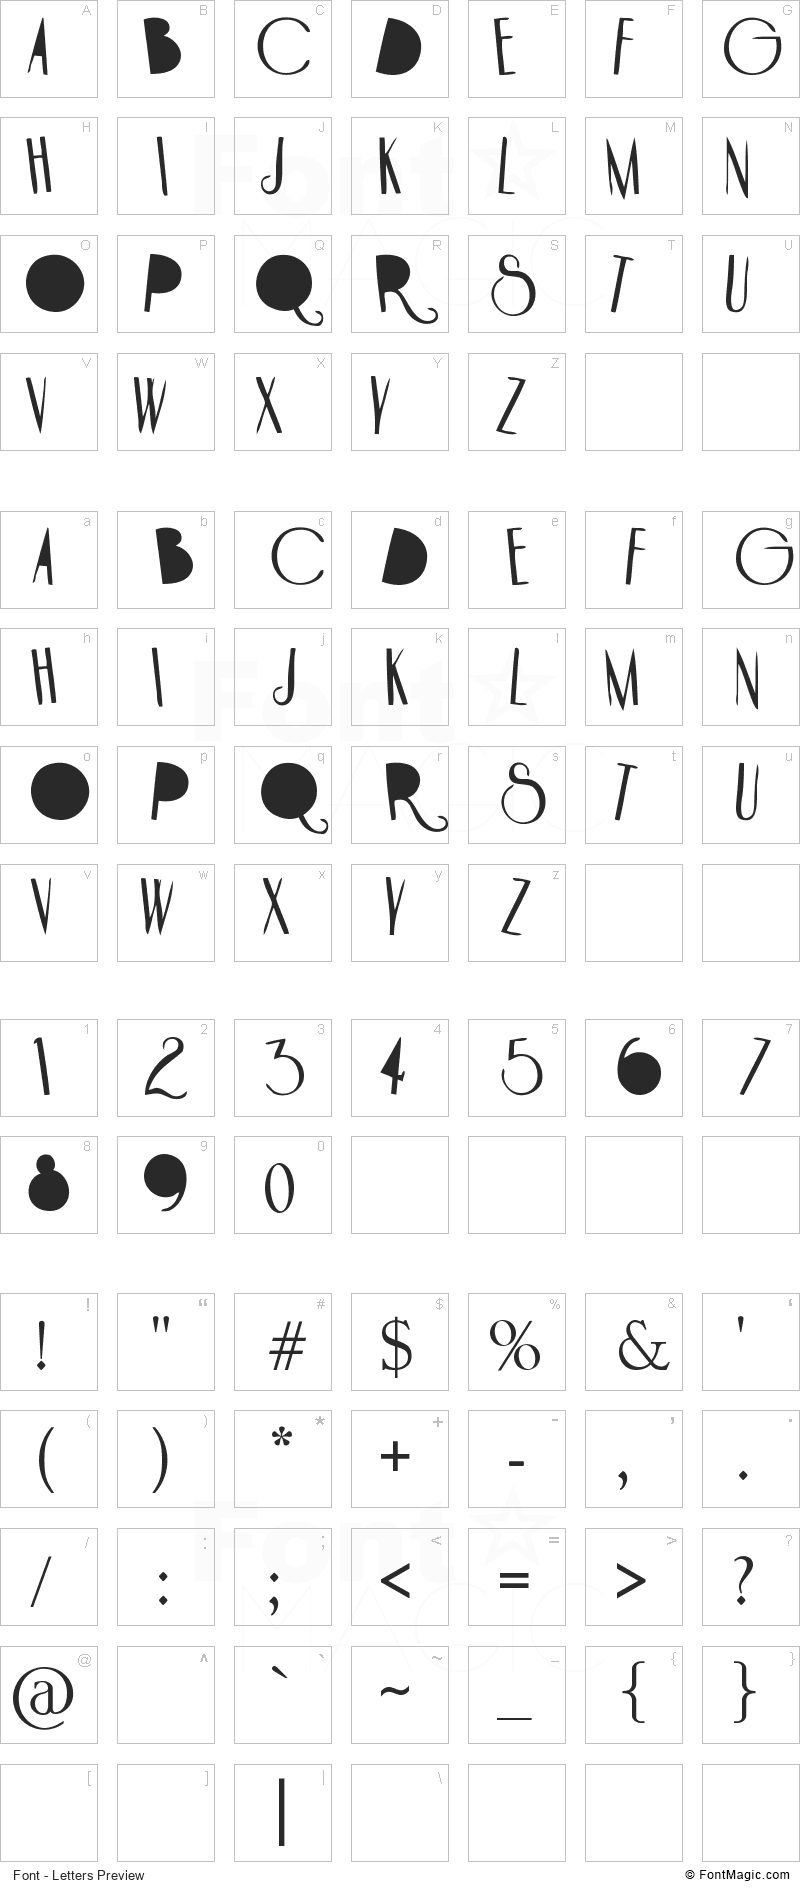 Hotel Paradiso Font - All Latters Preview Chart